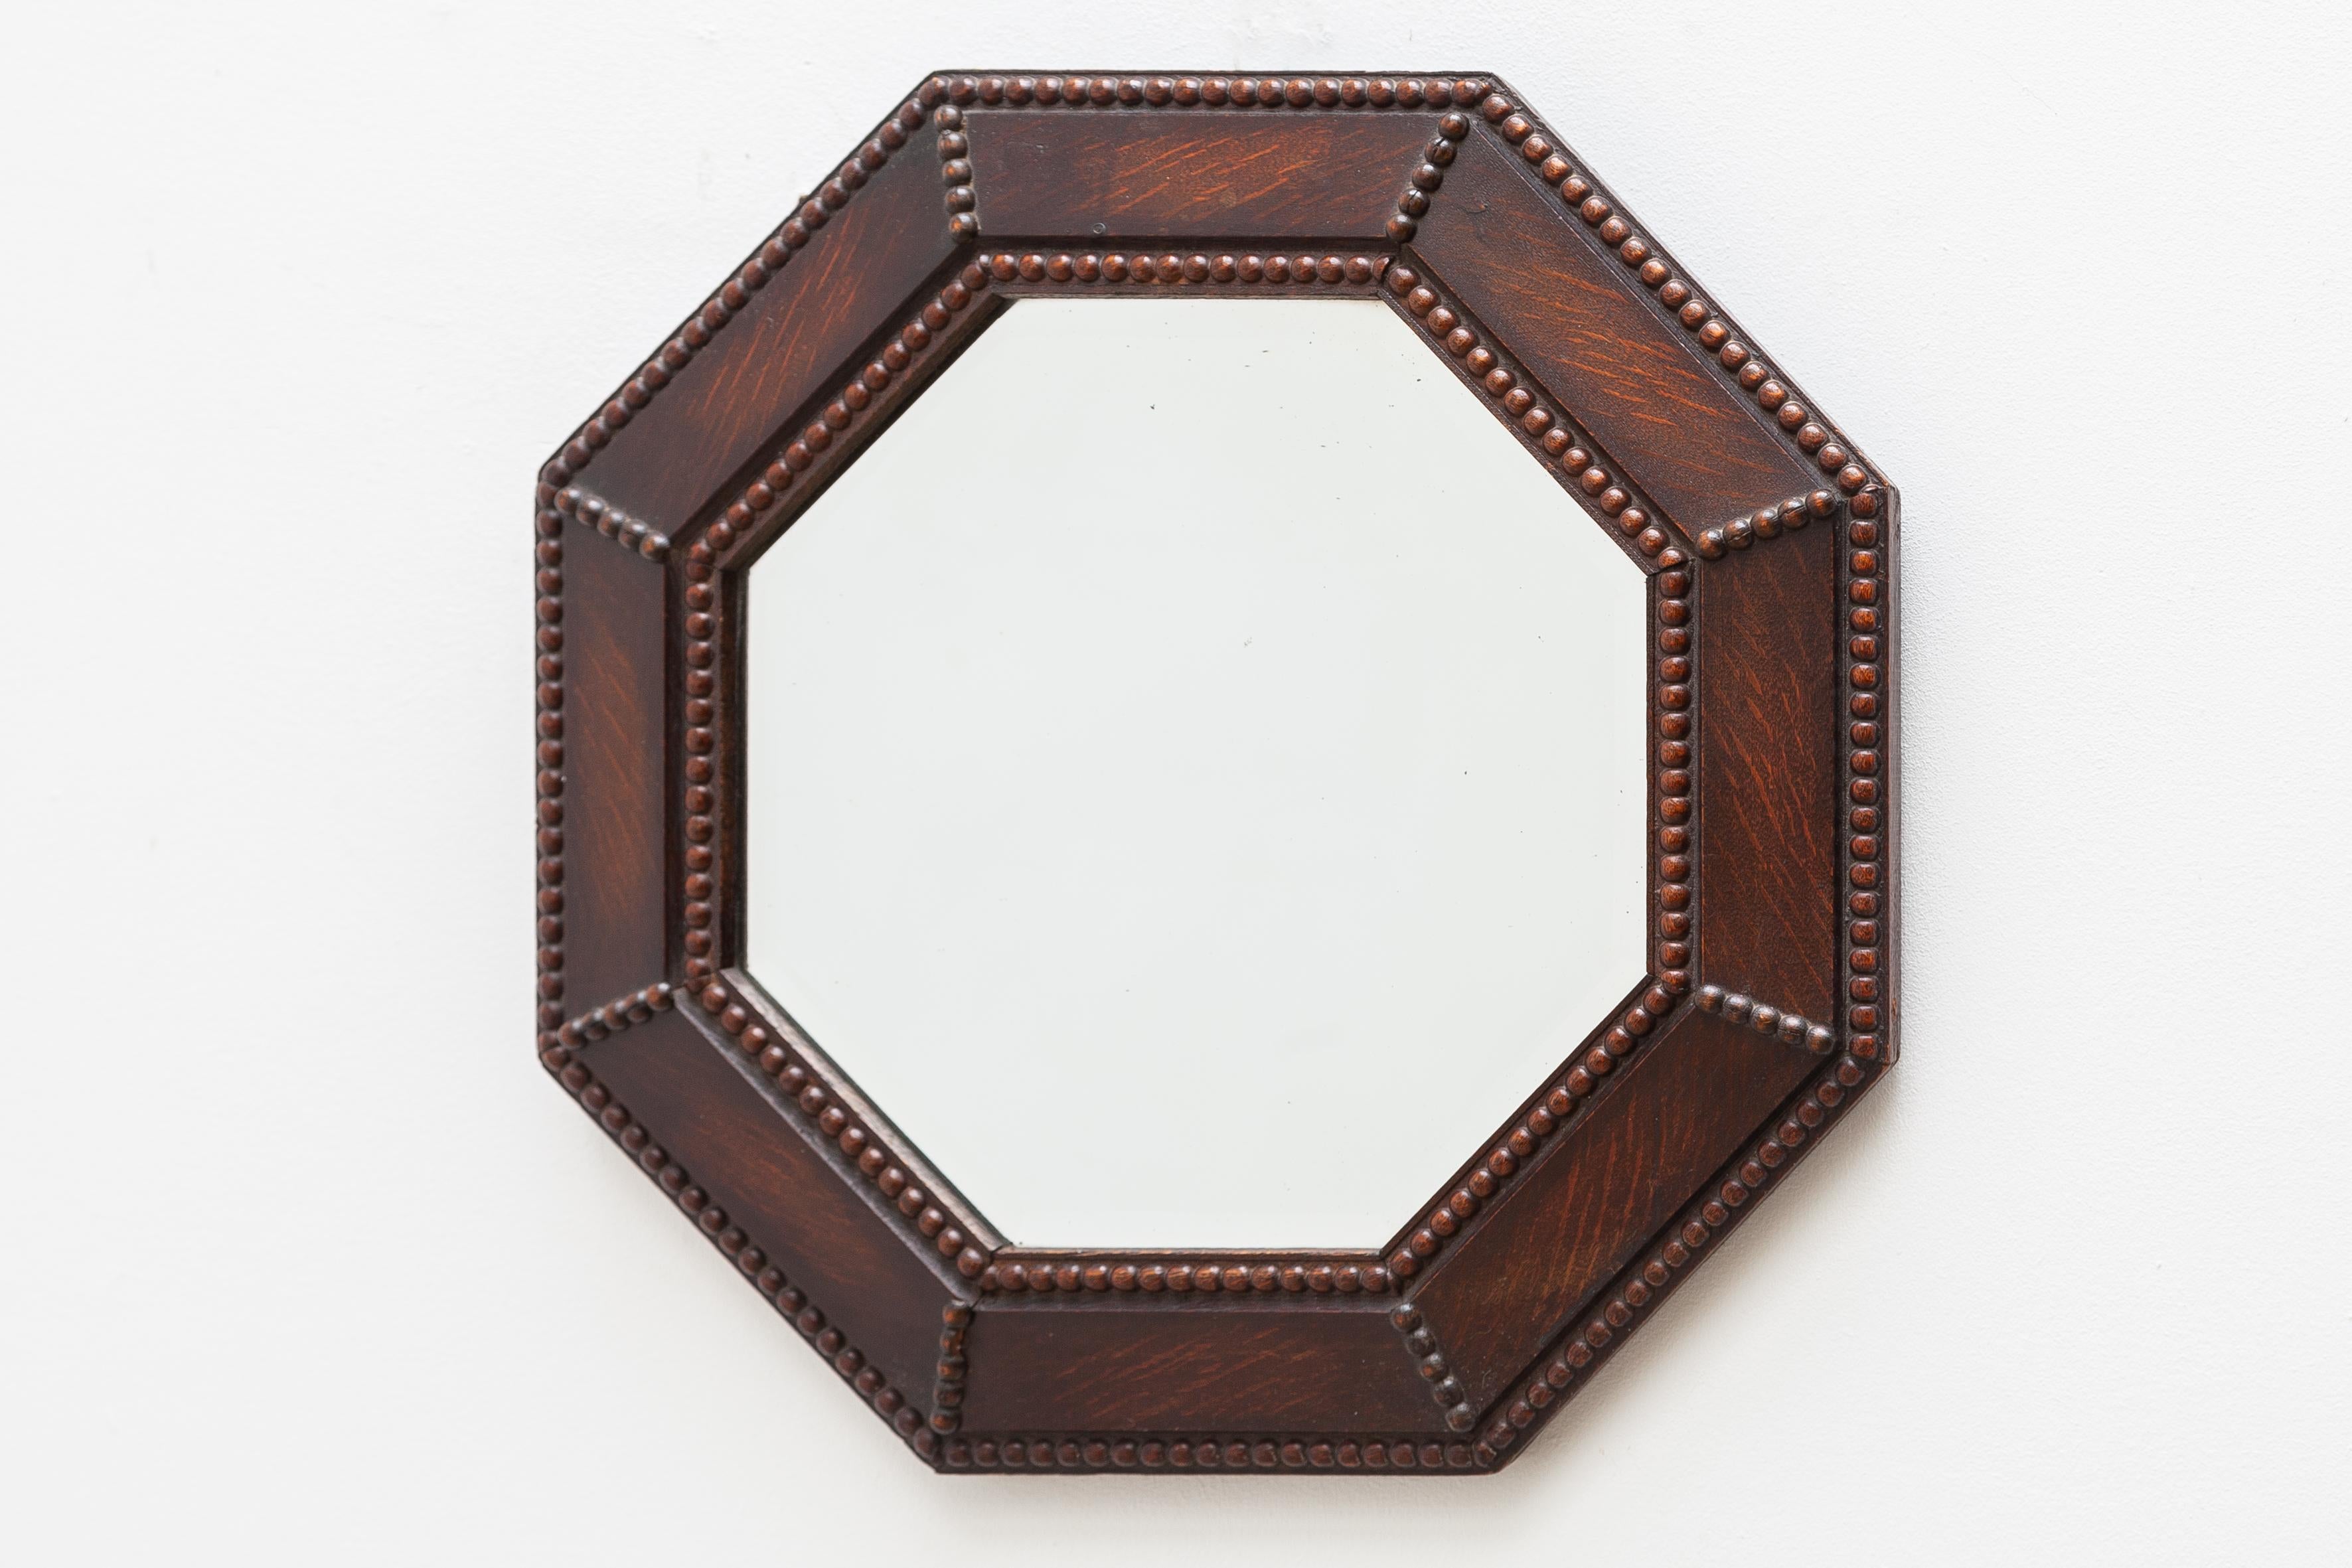 Very charming wall hanging octagonal oak framed beveled glass mirror in original good condition, designed in England, 1930s with beautiful decorative wood carvings around the frame.